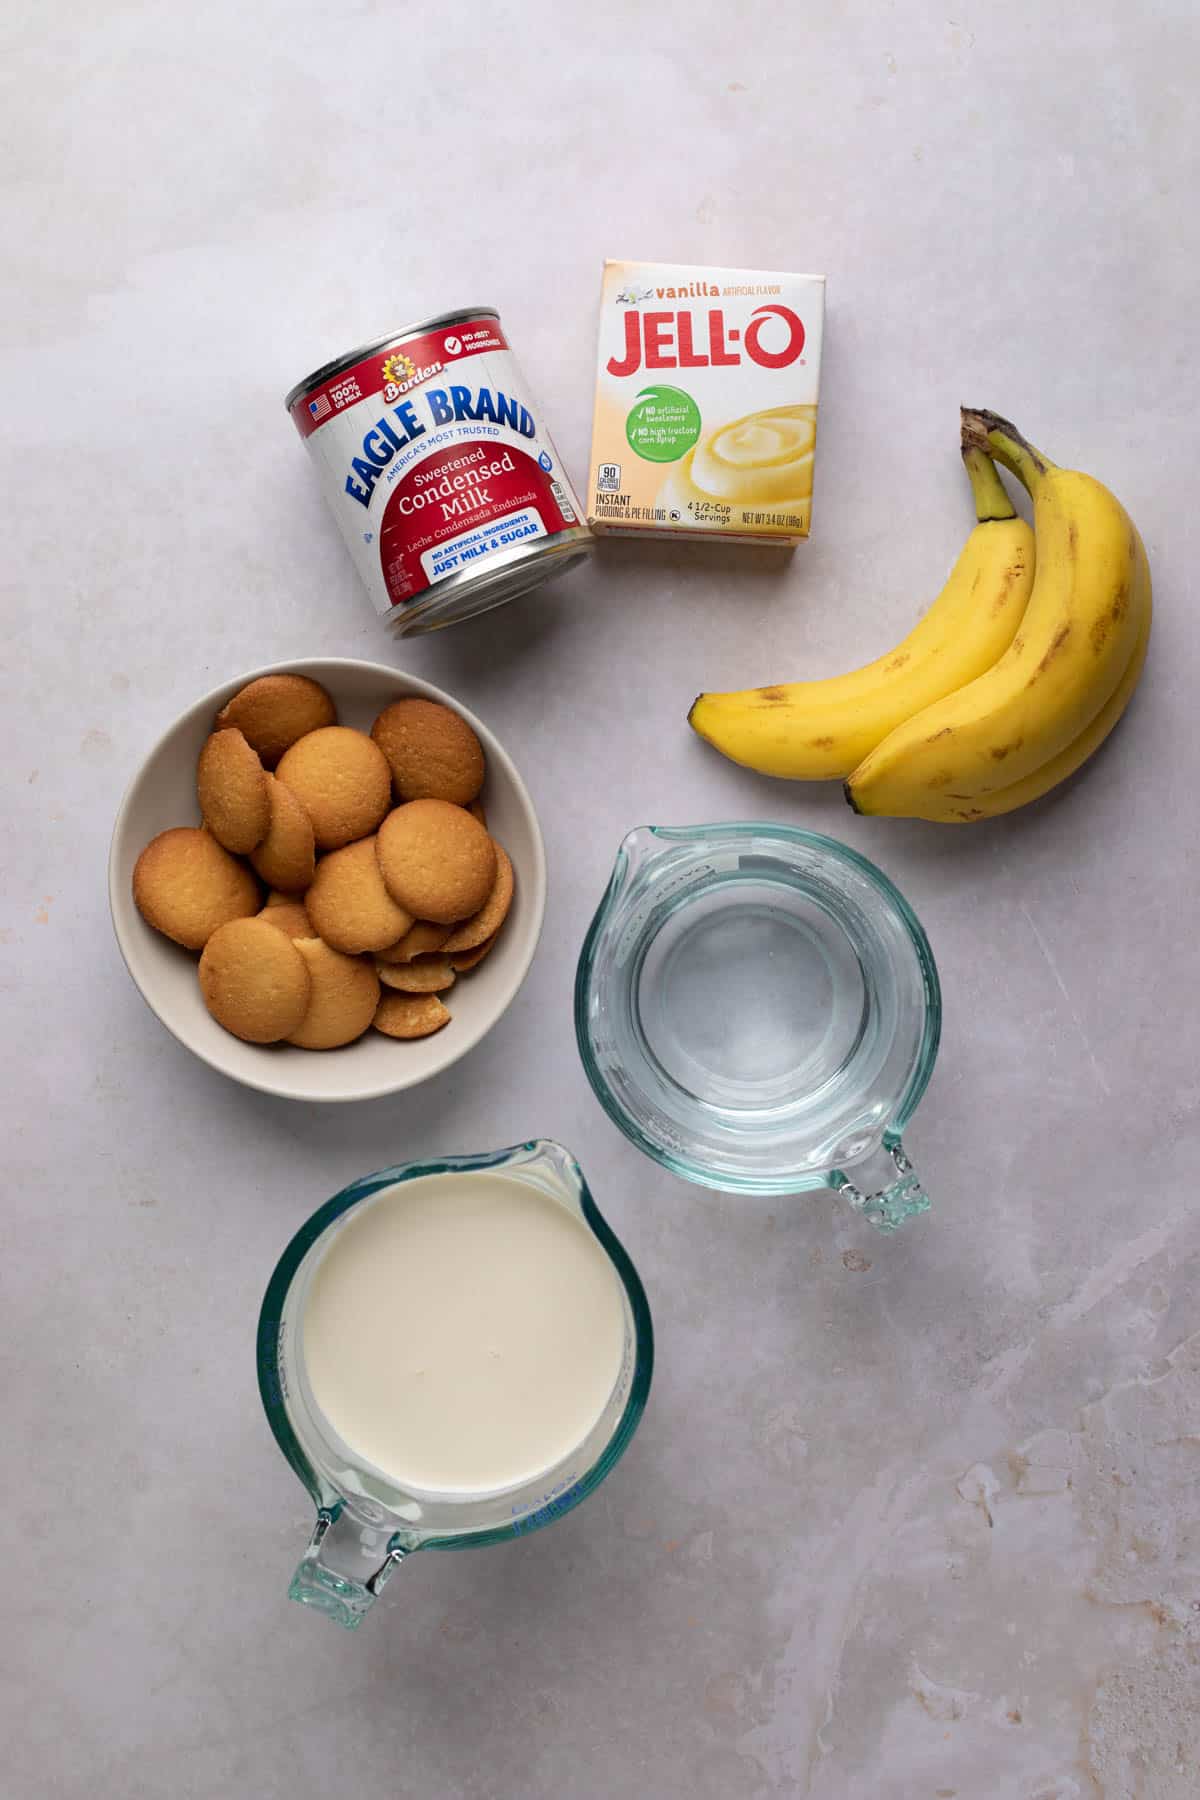 Ingredients for banana pudding in a jar on a flat surface.